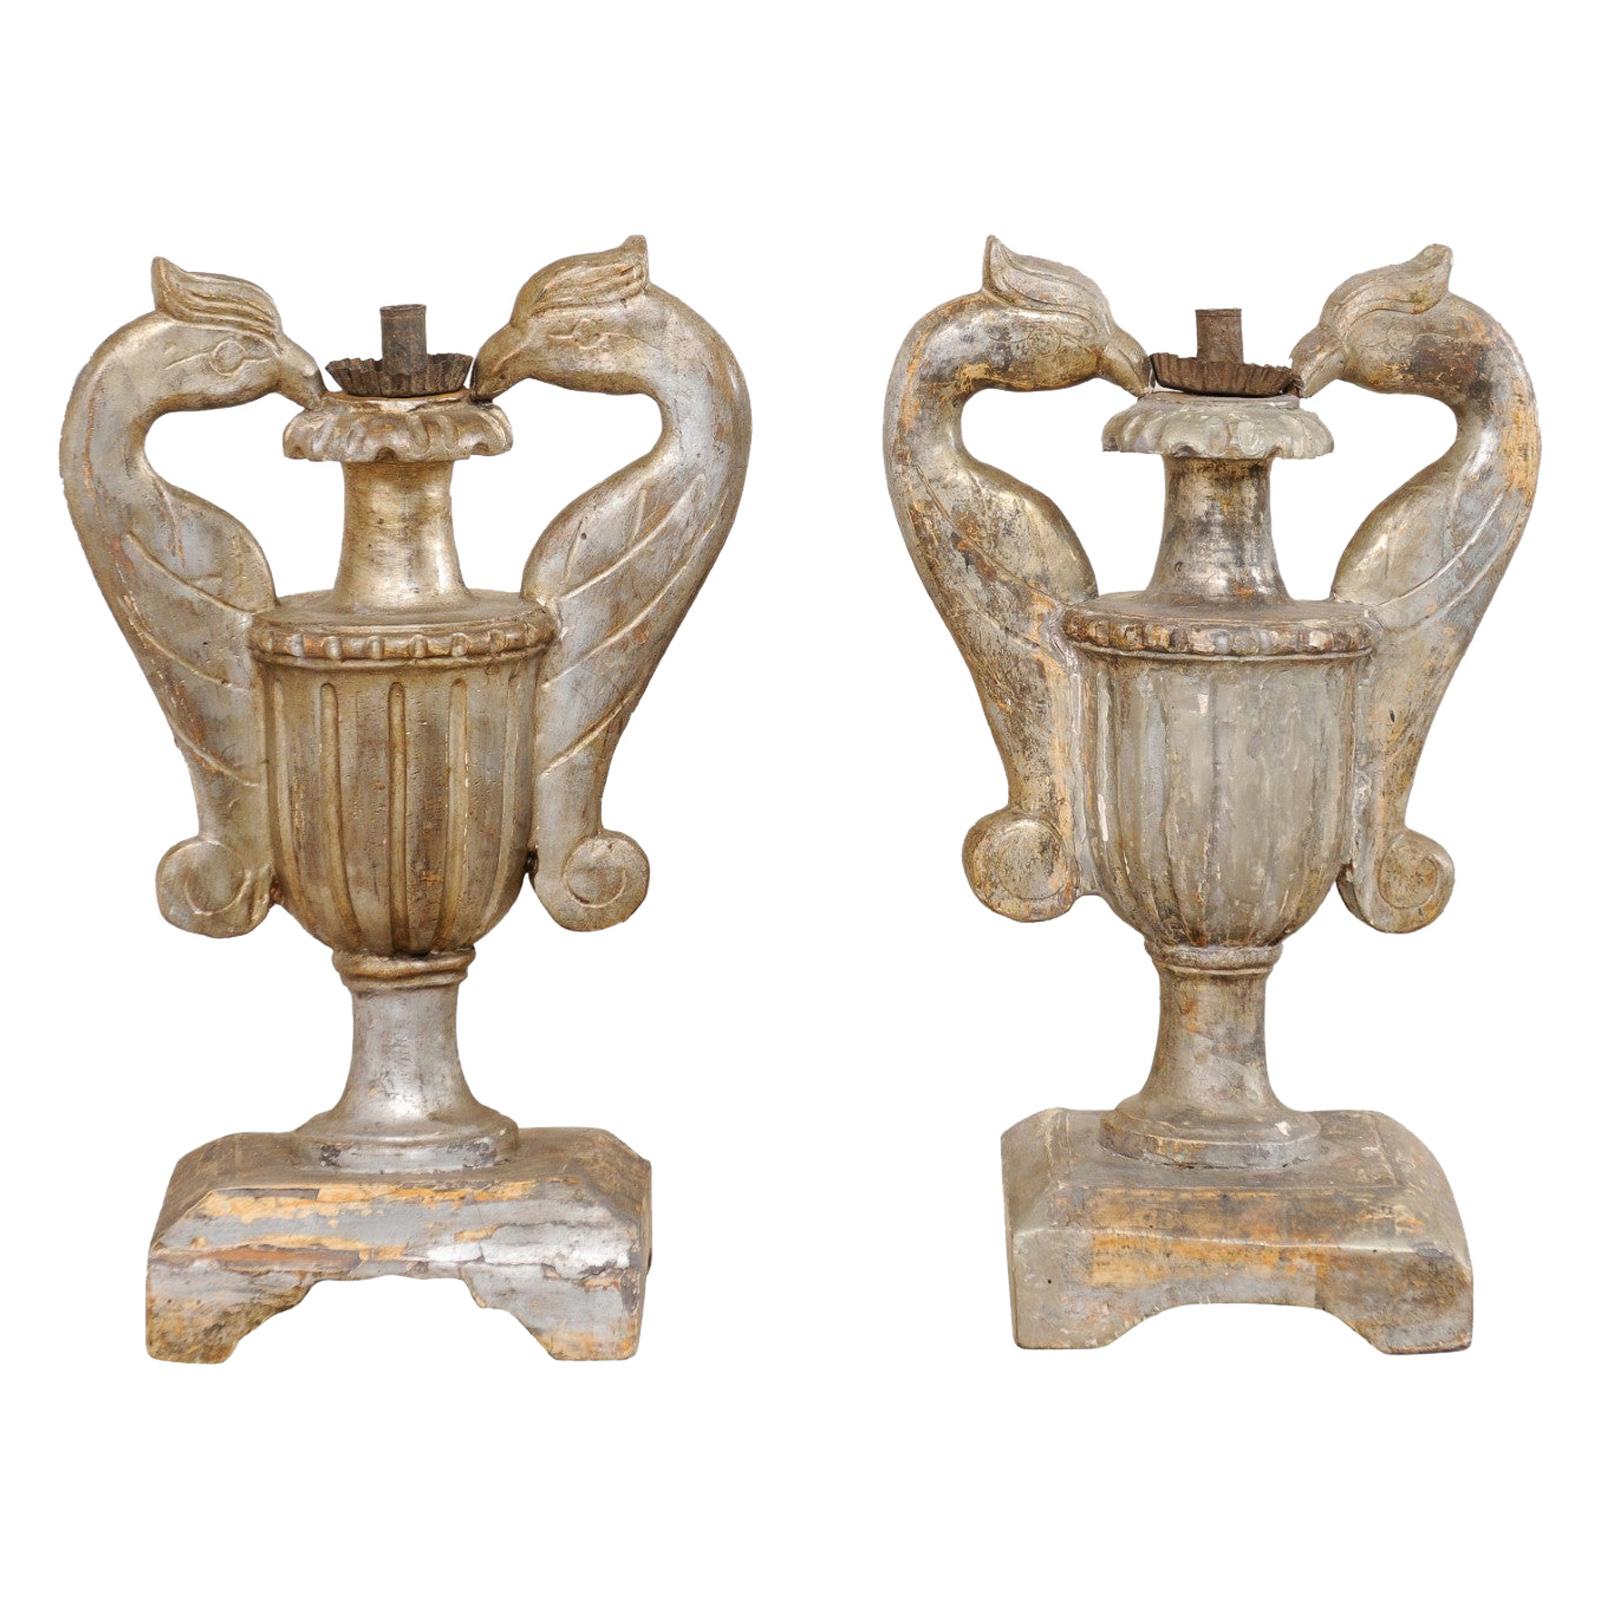 Italian Pair of Wood Candle Lamp Urns with Carved Bird Handles, 19th Century